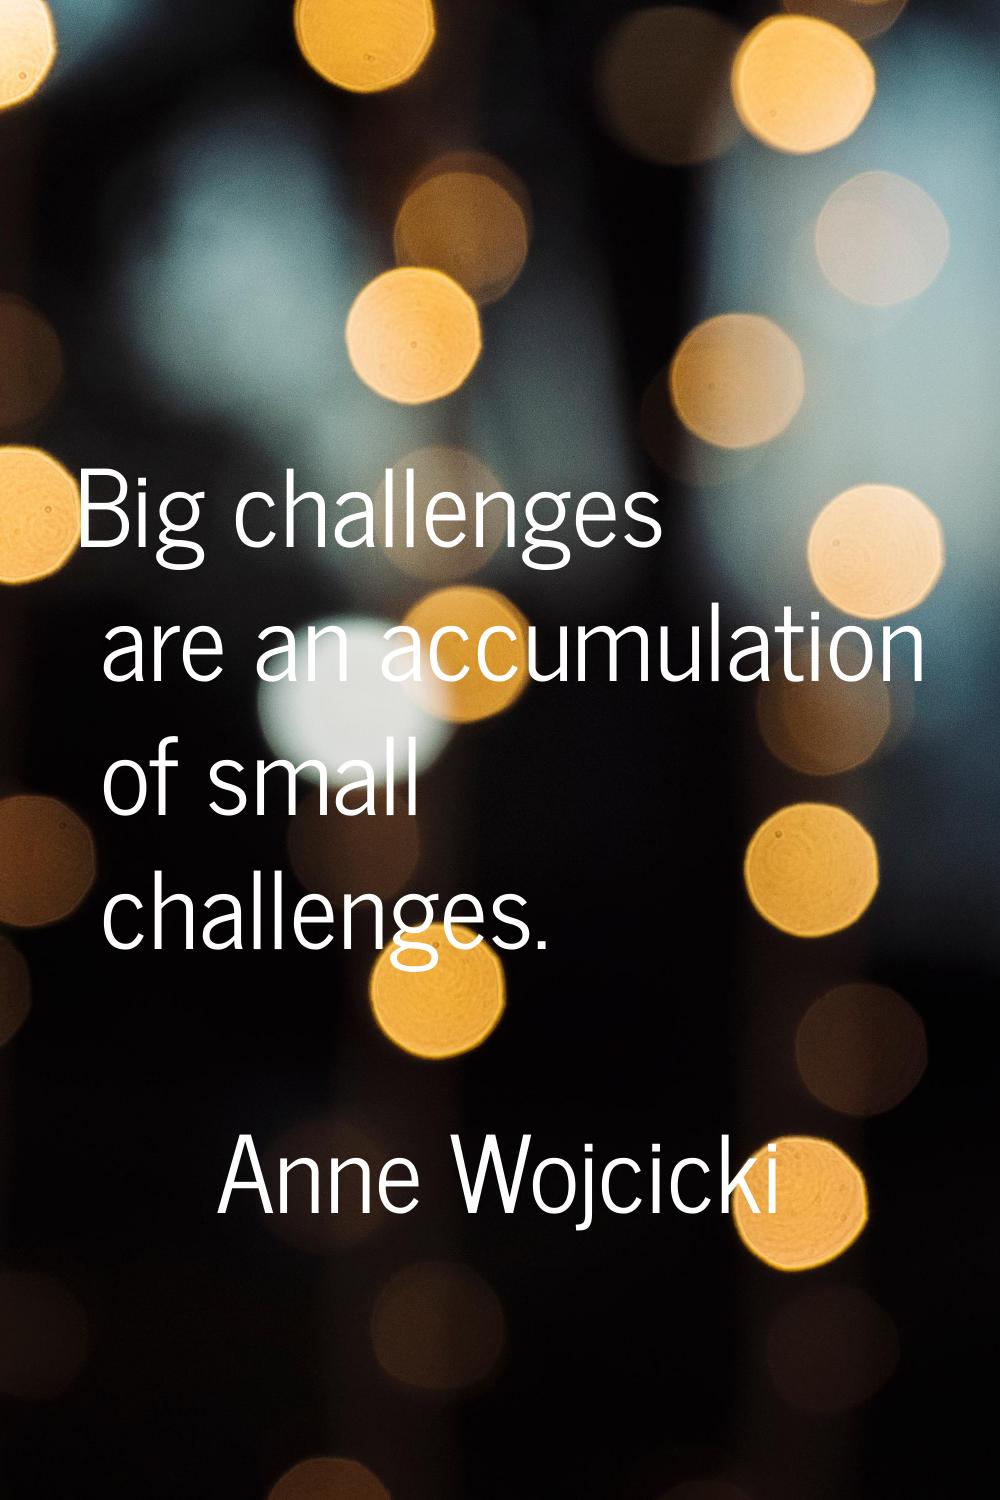 Big challenges are an accumulation of small challenges.